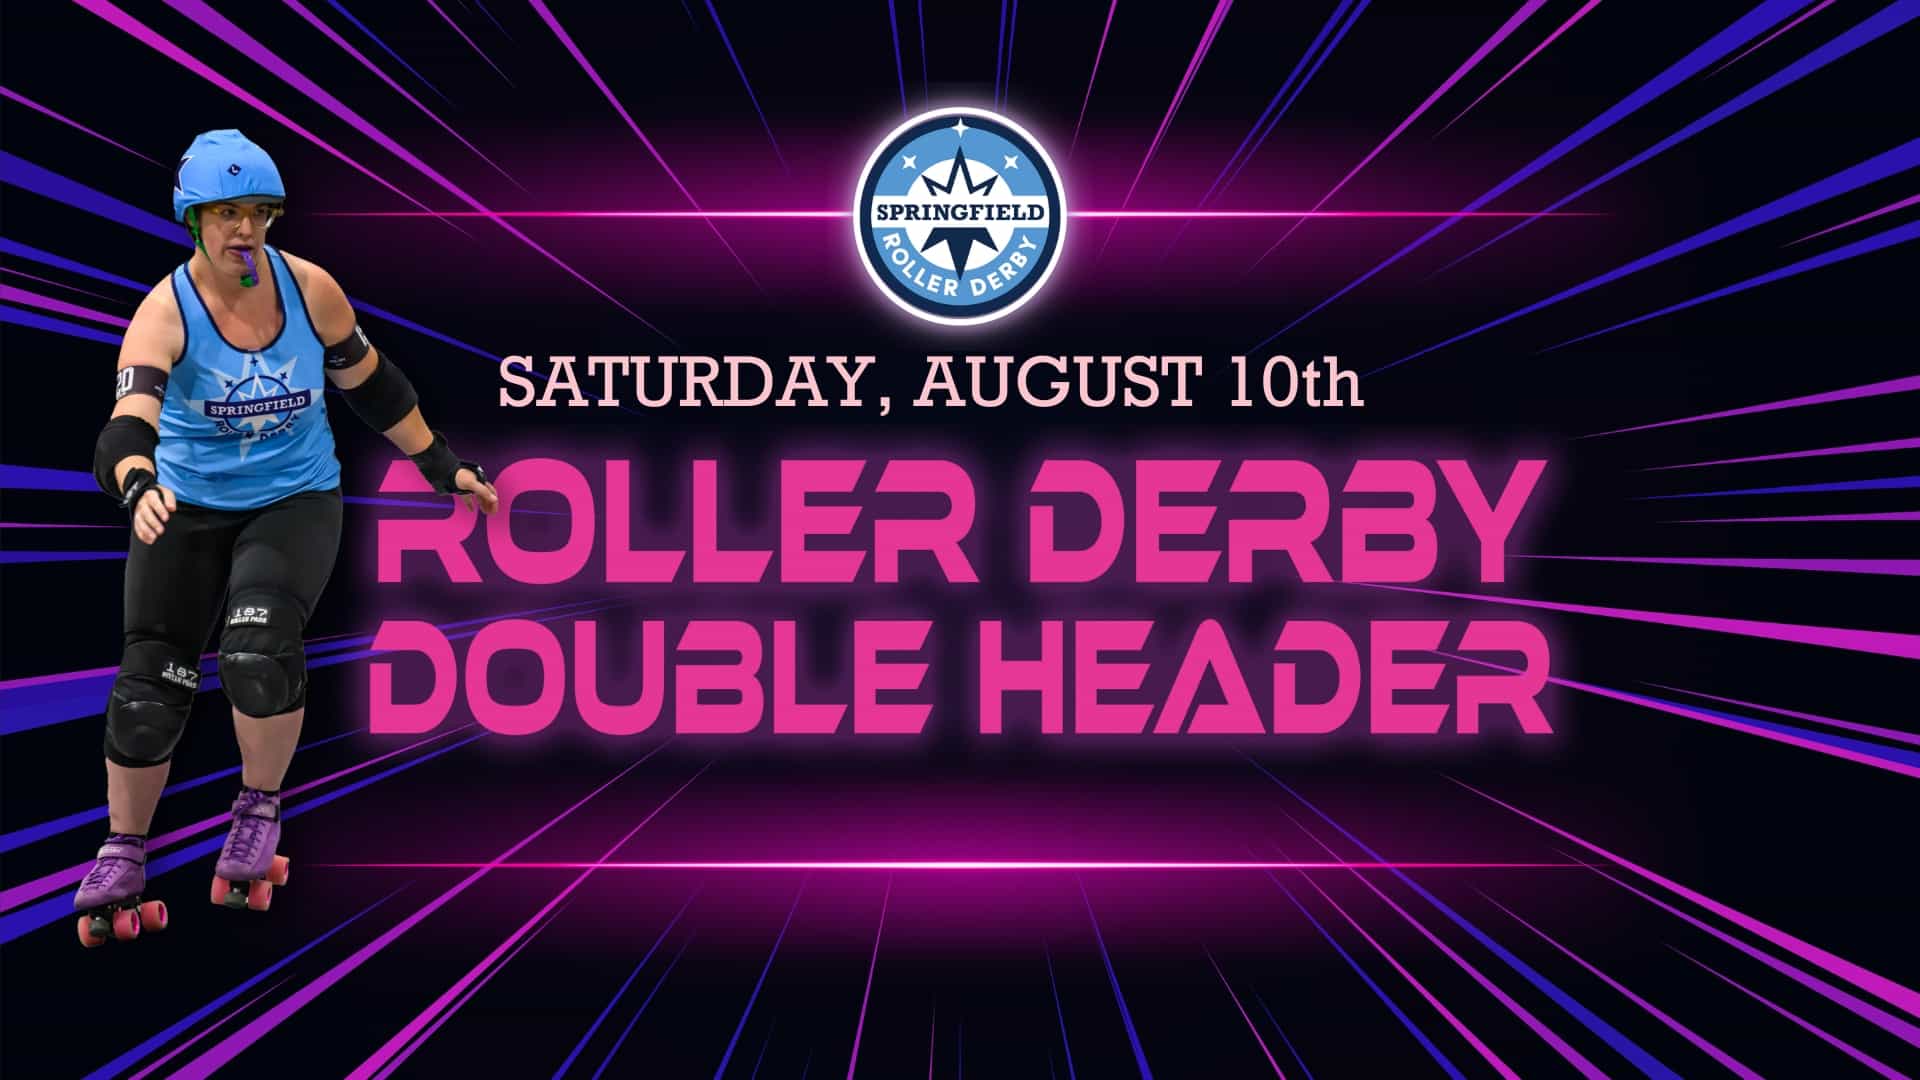 Graphic with image of lasers in a black background, image of SRD skater, and SRD logo. Text reads Saturday, August 10th Roller Derby Double Header